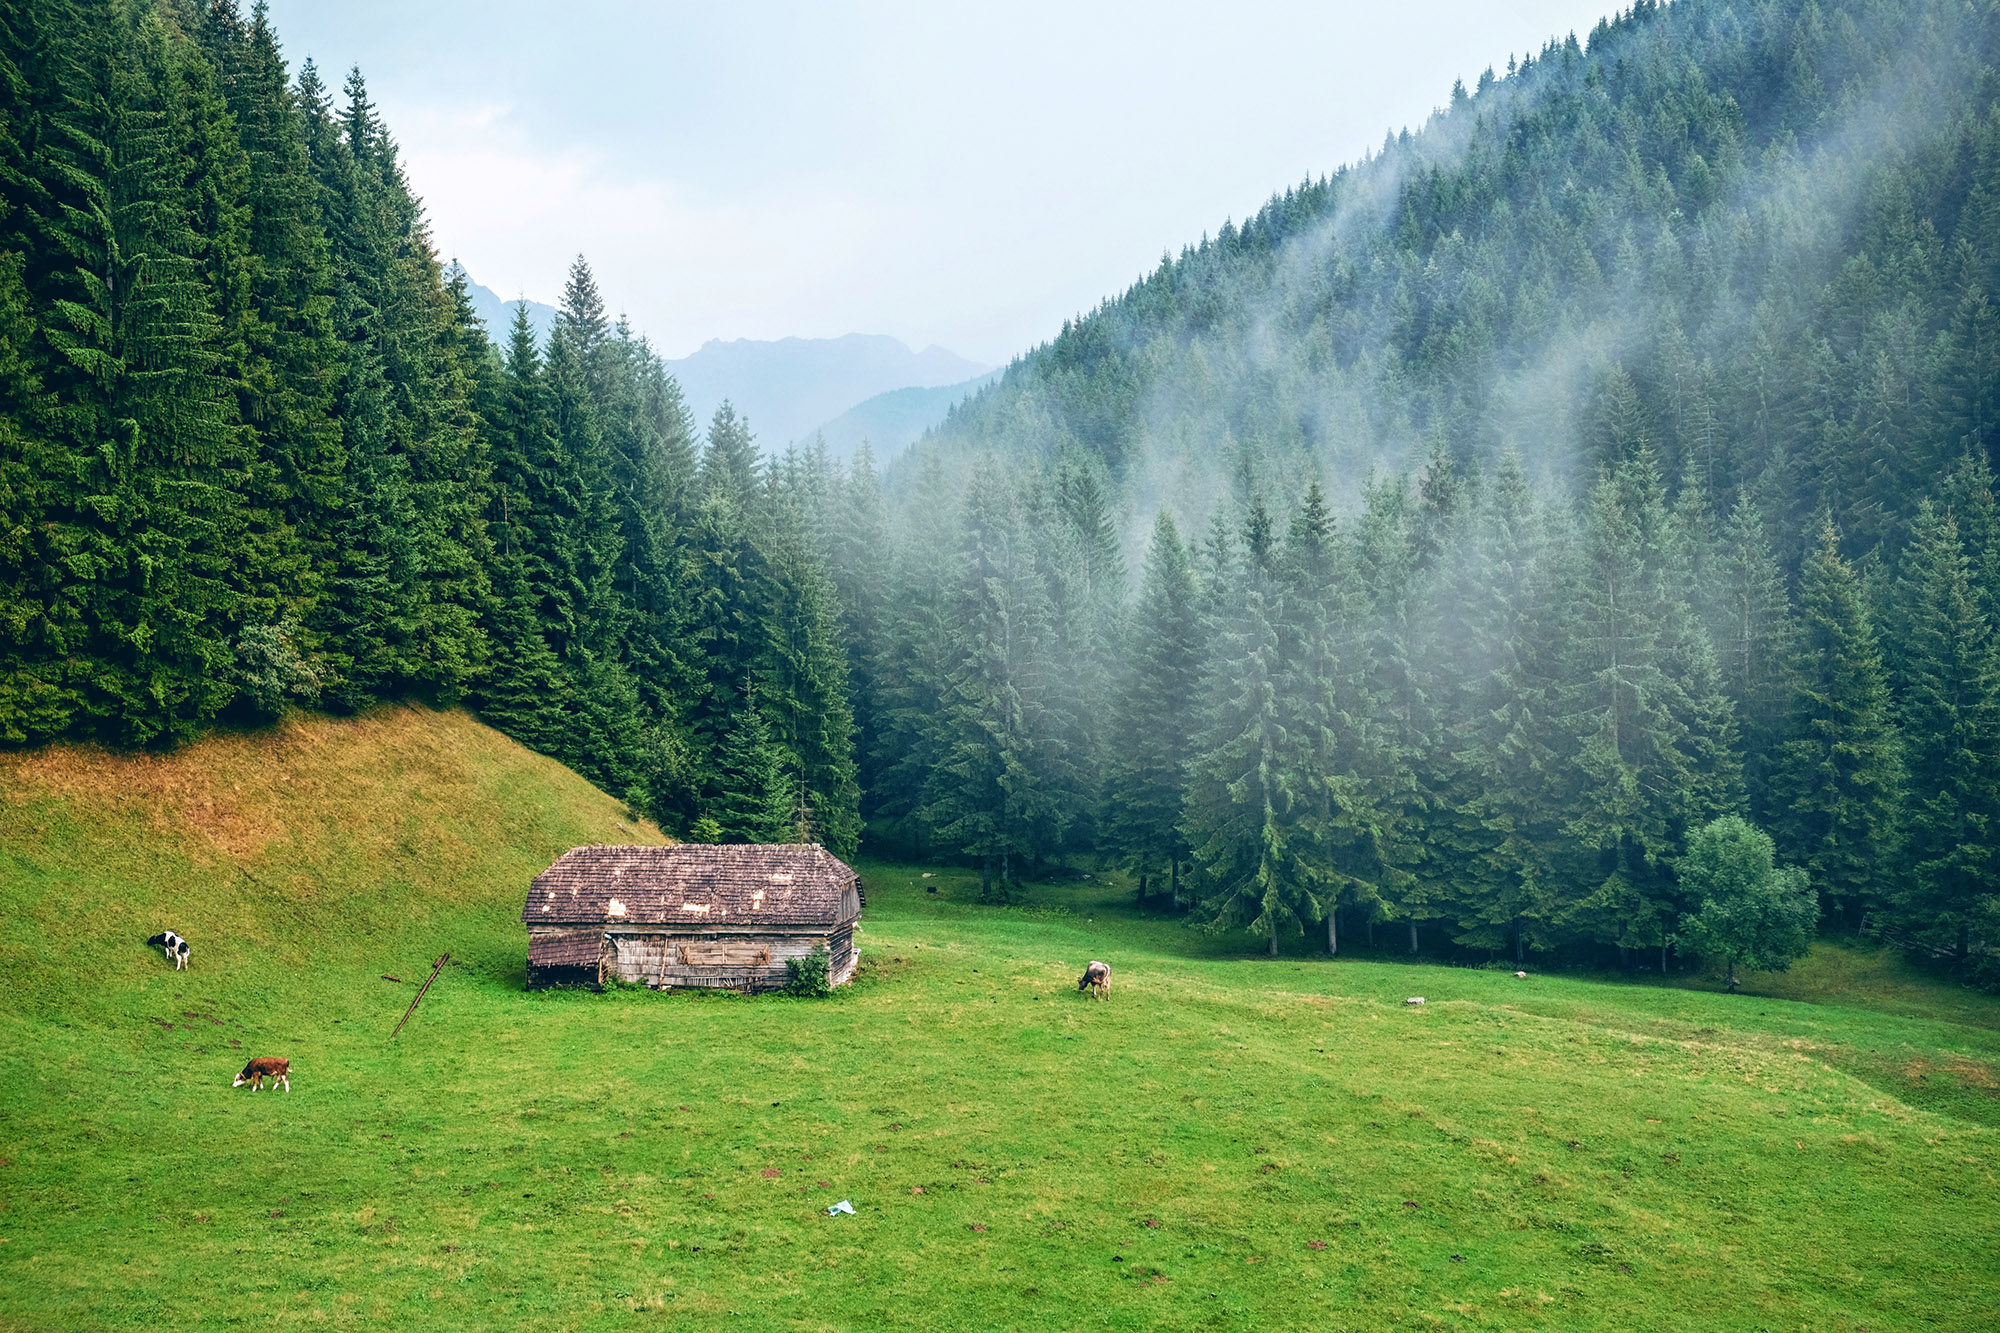 Romania Travel Guide - a beautiful little chalet in the mountains of Romania